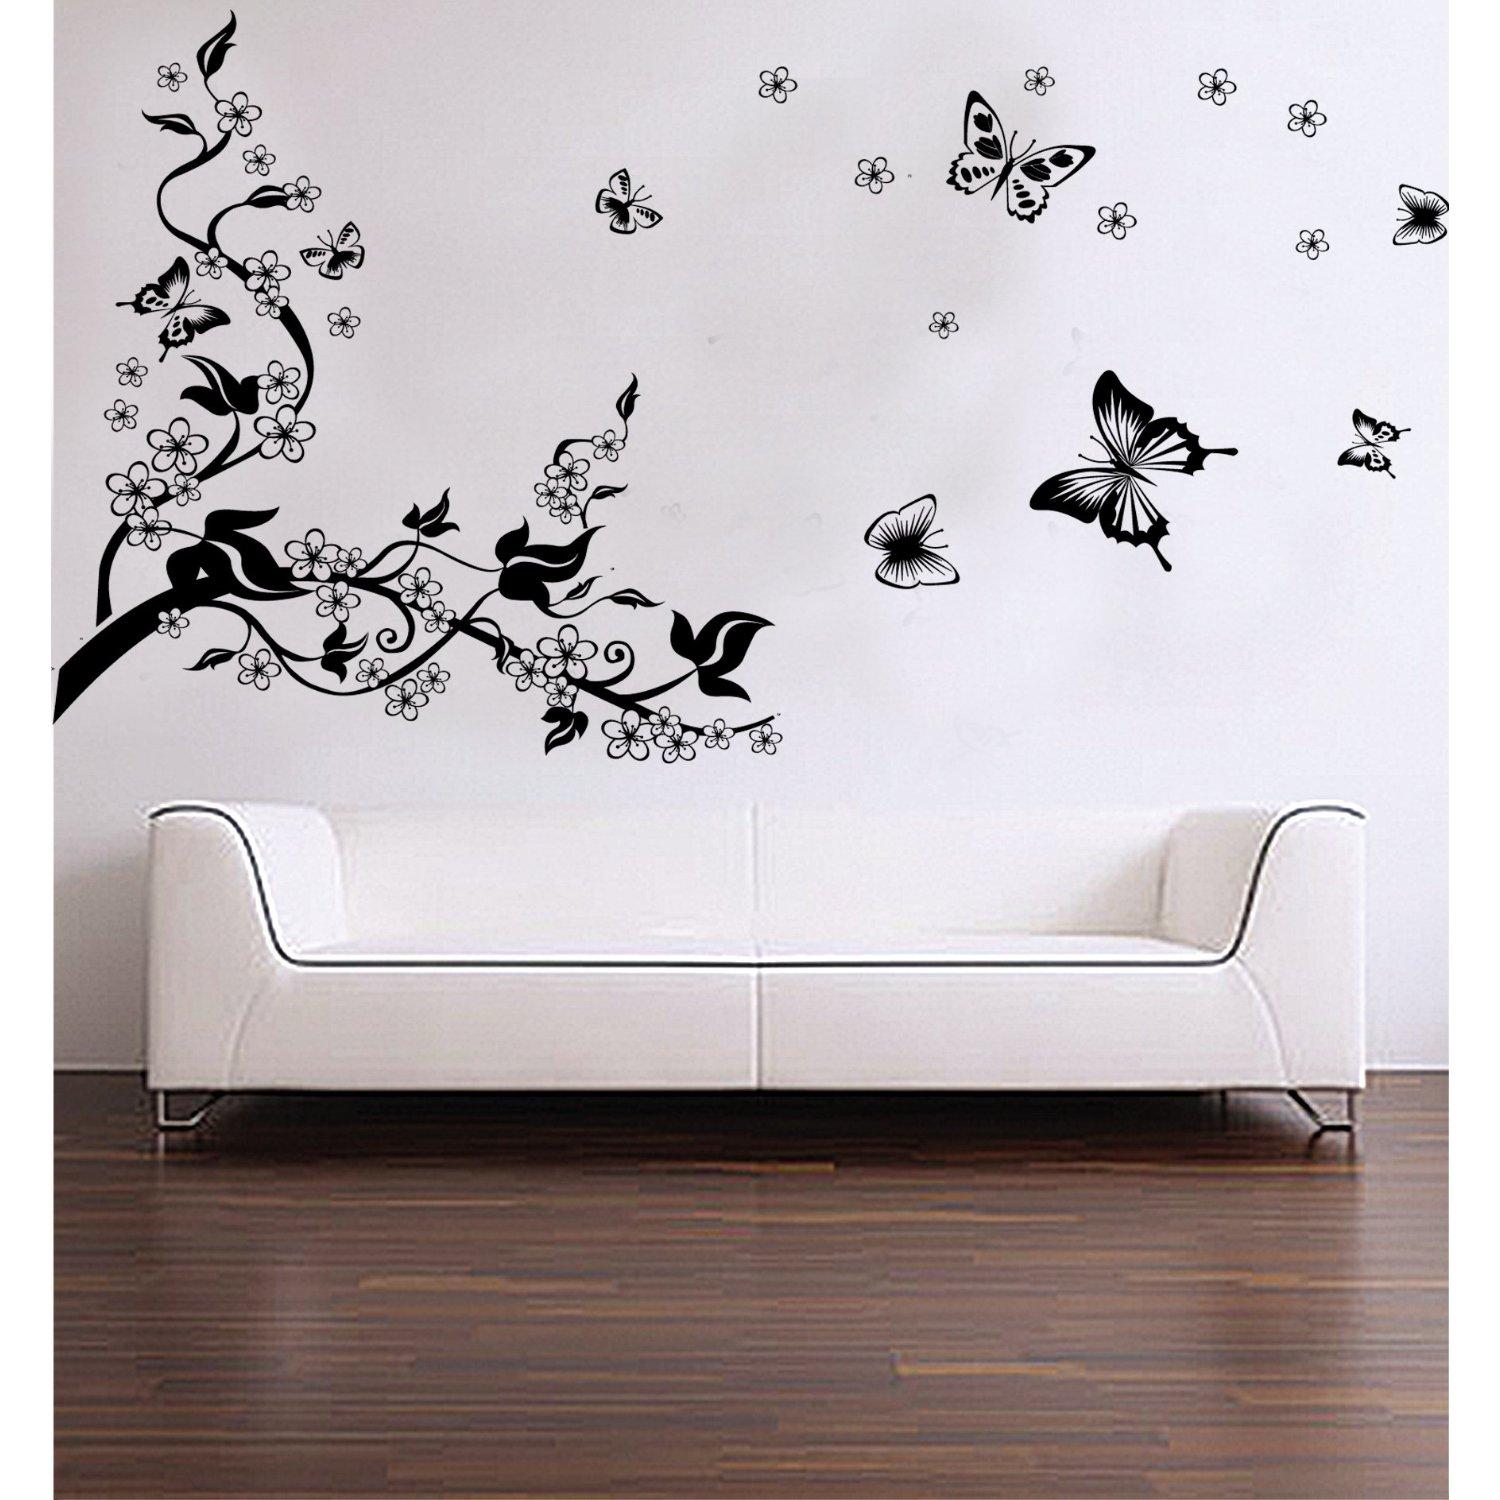 wall-decals-image.